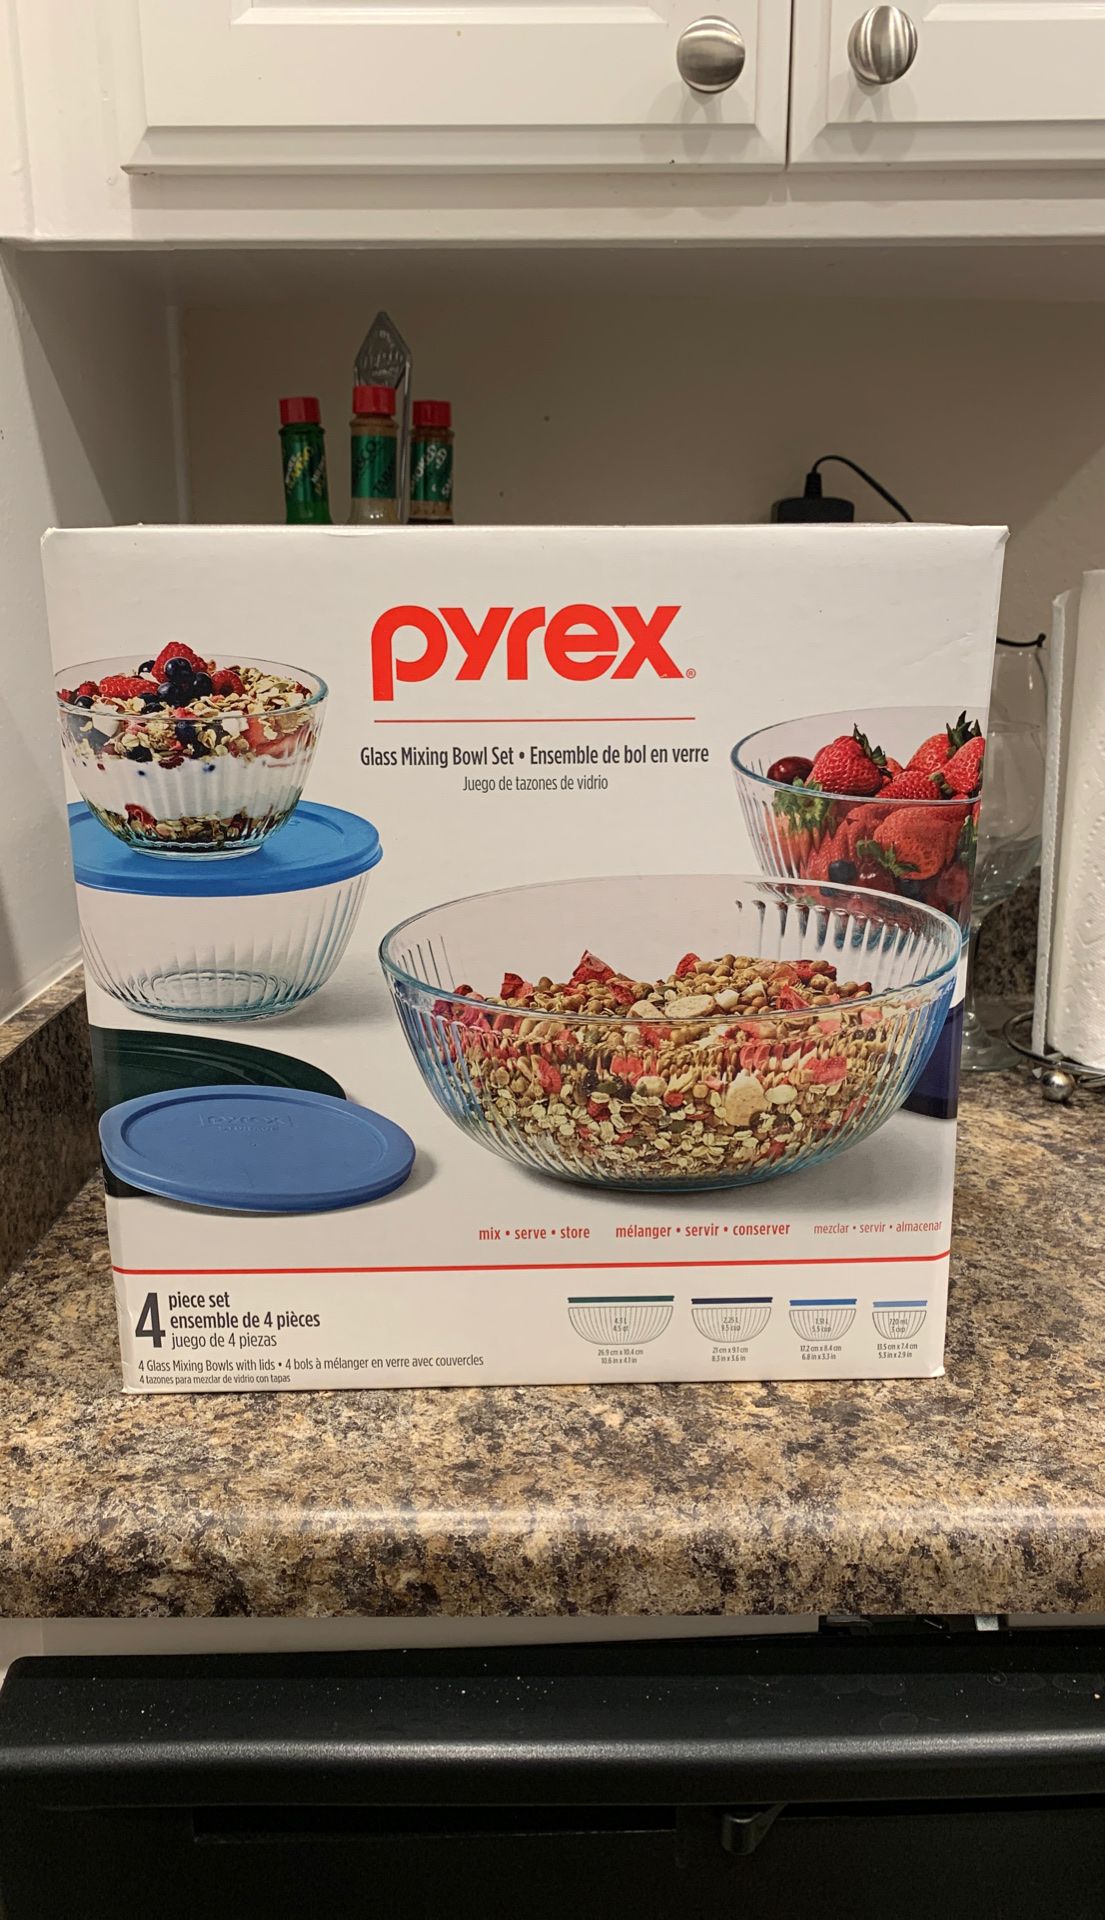 Pyrex glass mixing bowls/containers